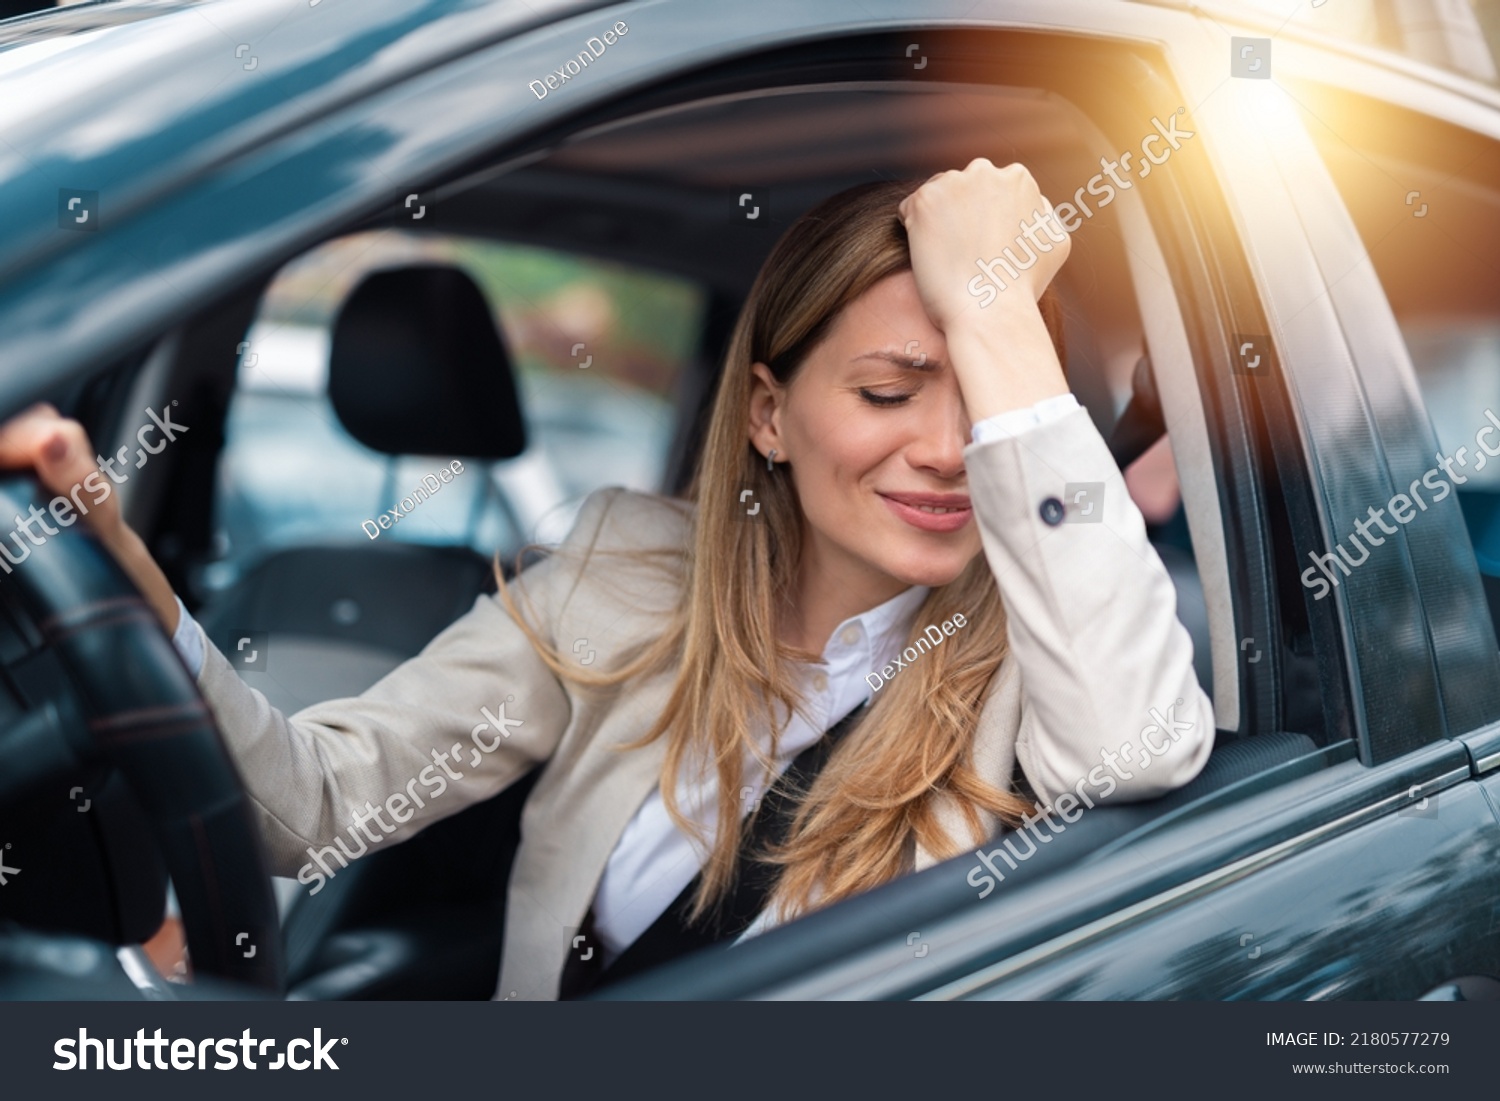 Woman Driver Scared Shocked Before Crash Stock Photo 2180577279